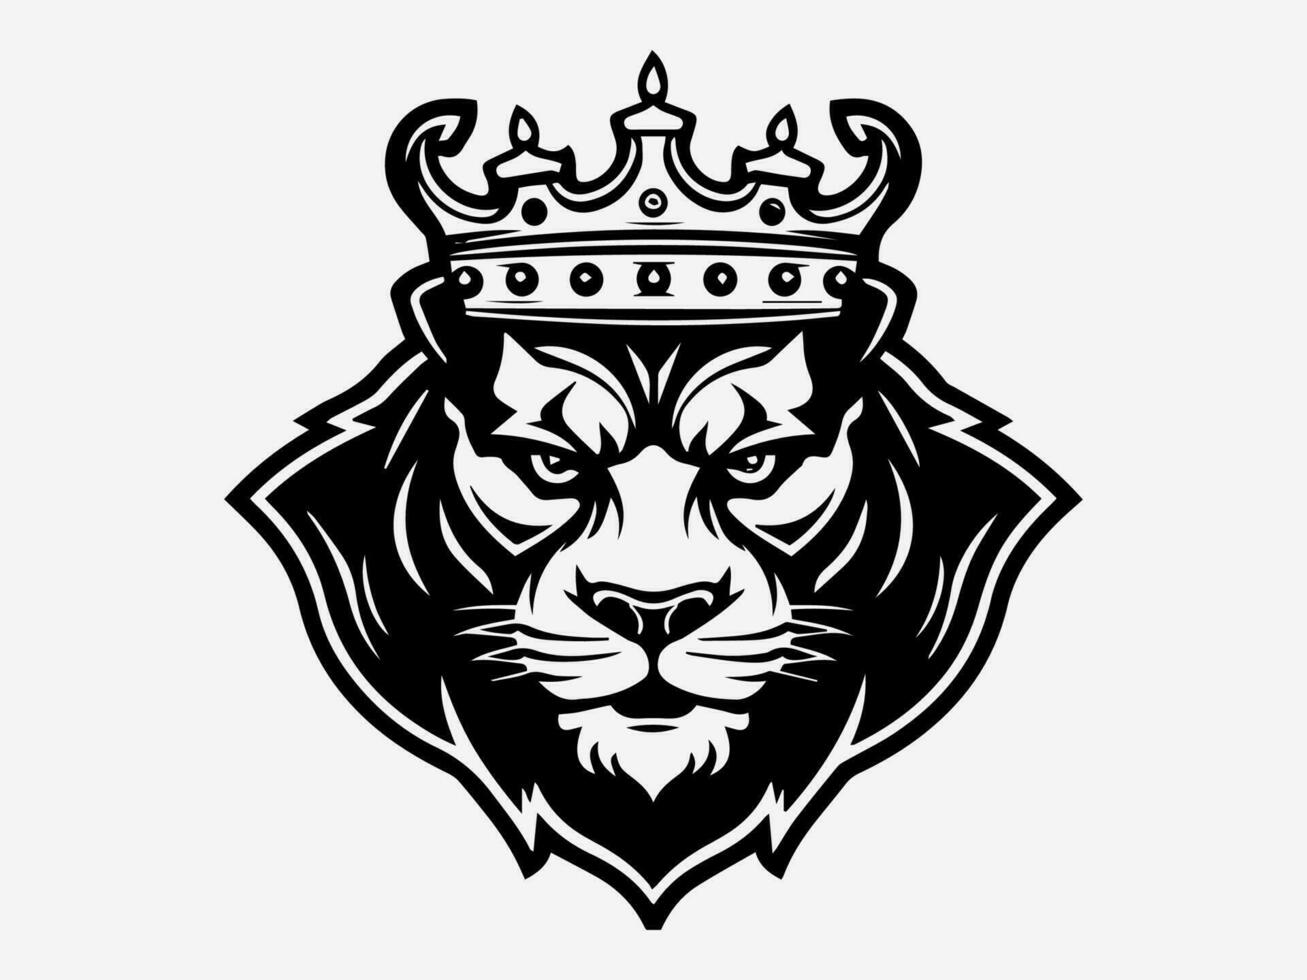 Bold and fierce panther hand drawn logo design illustration, embodying power, strength, and elegance vector